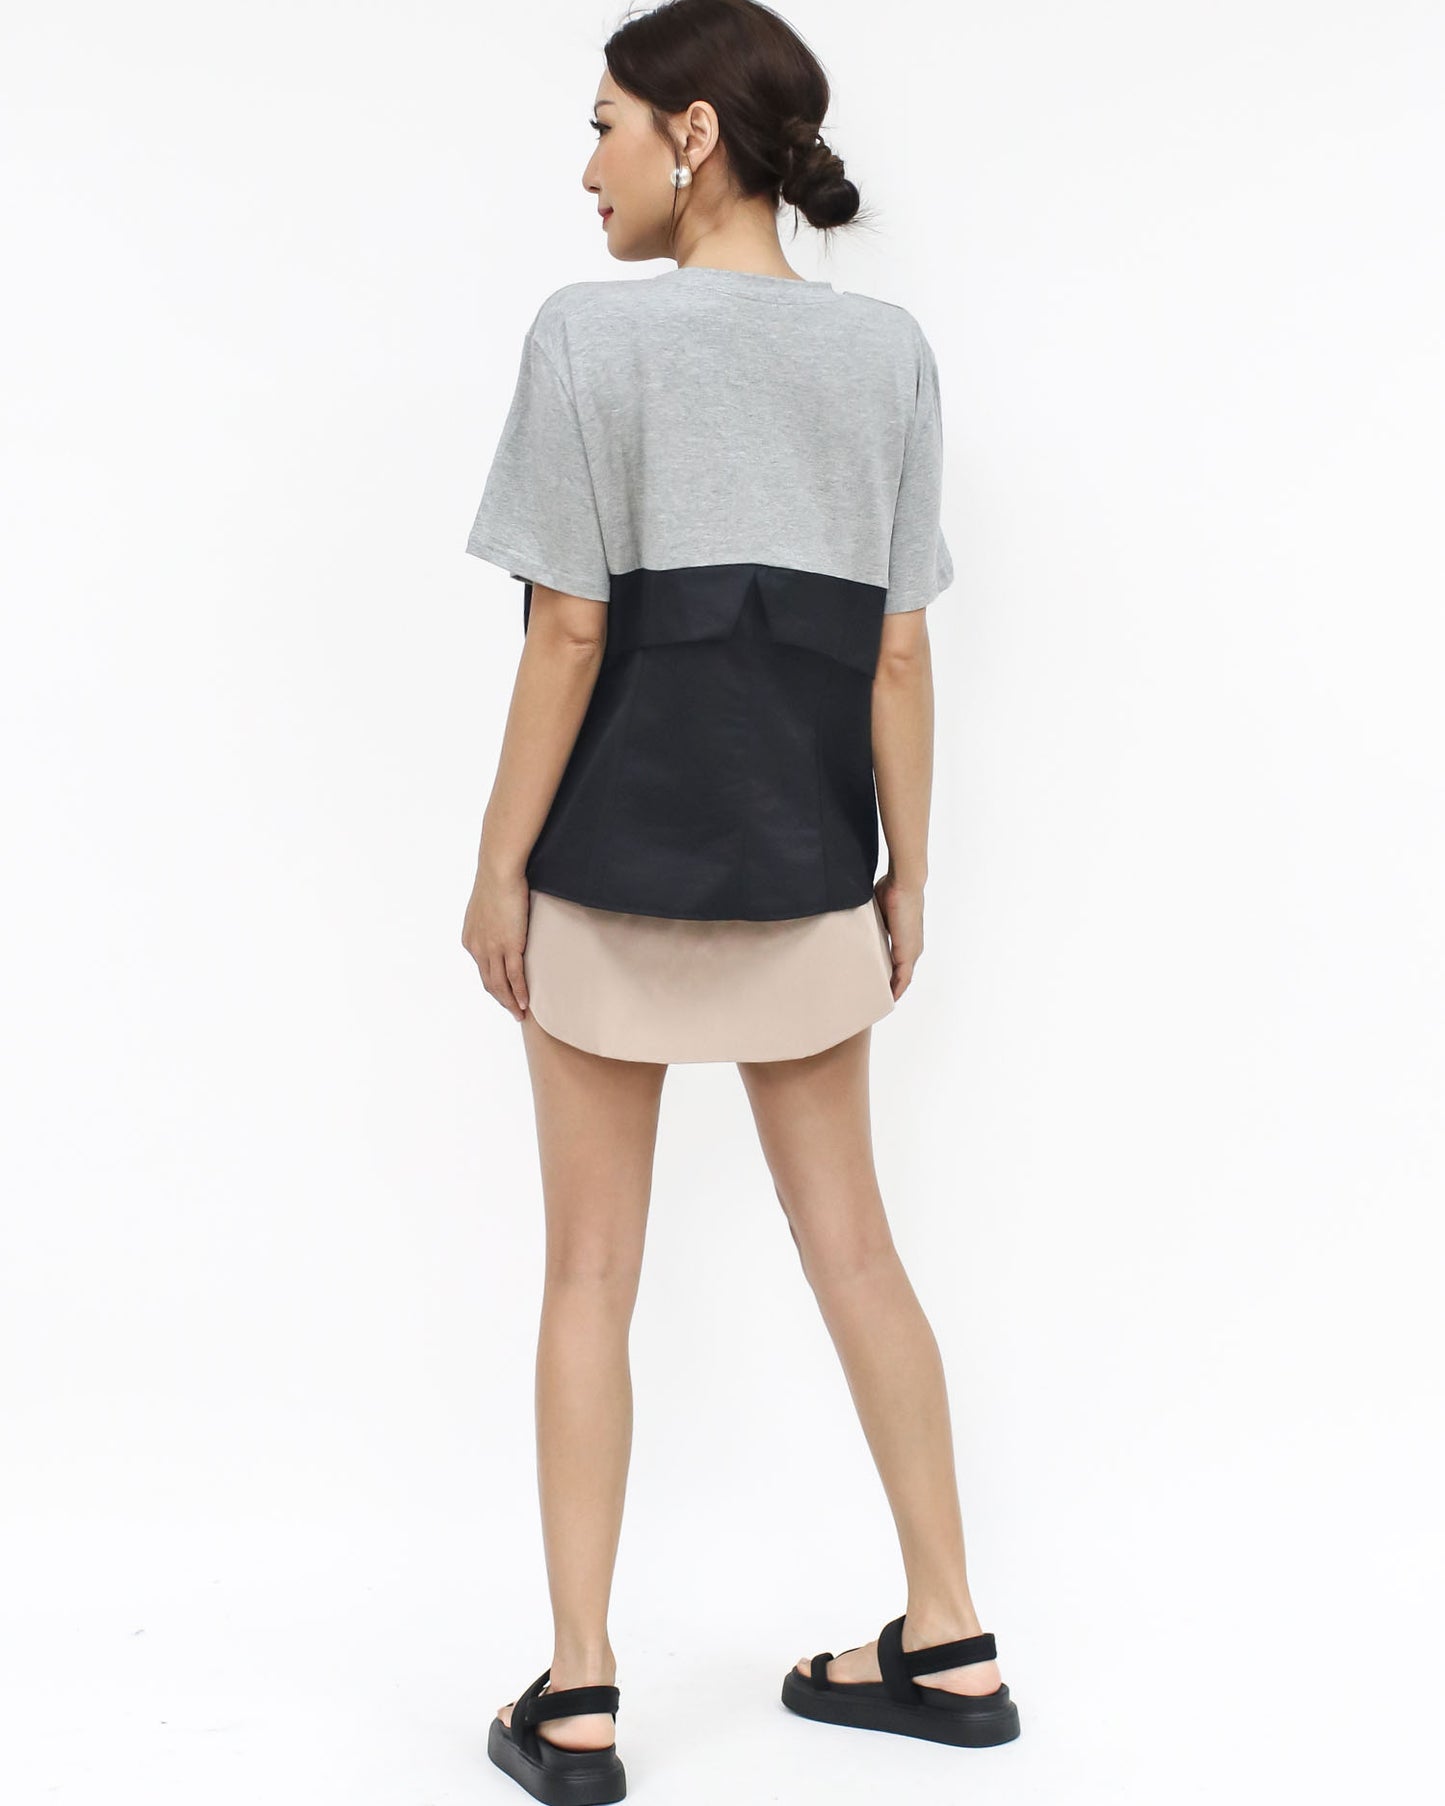 grey w/ black ruched contrast tee